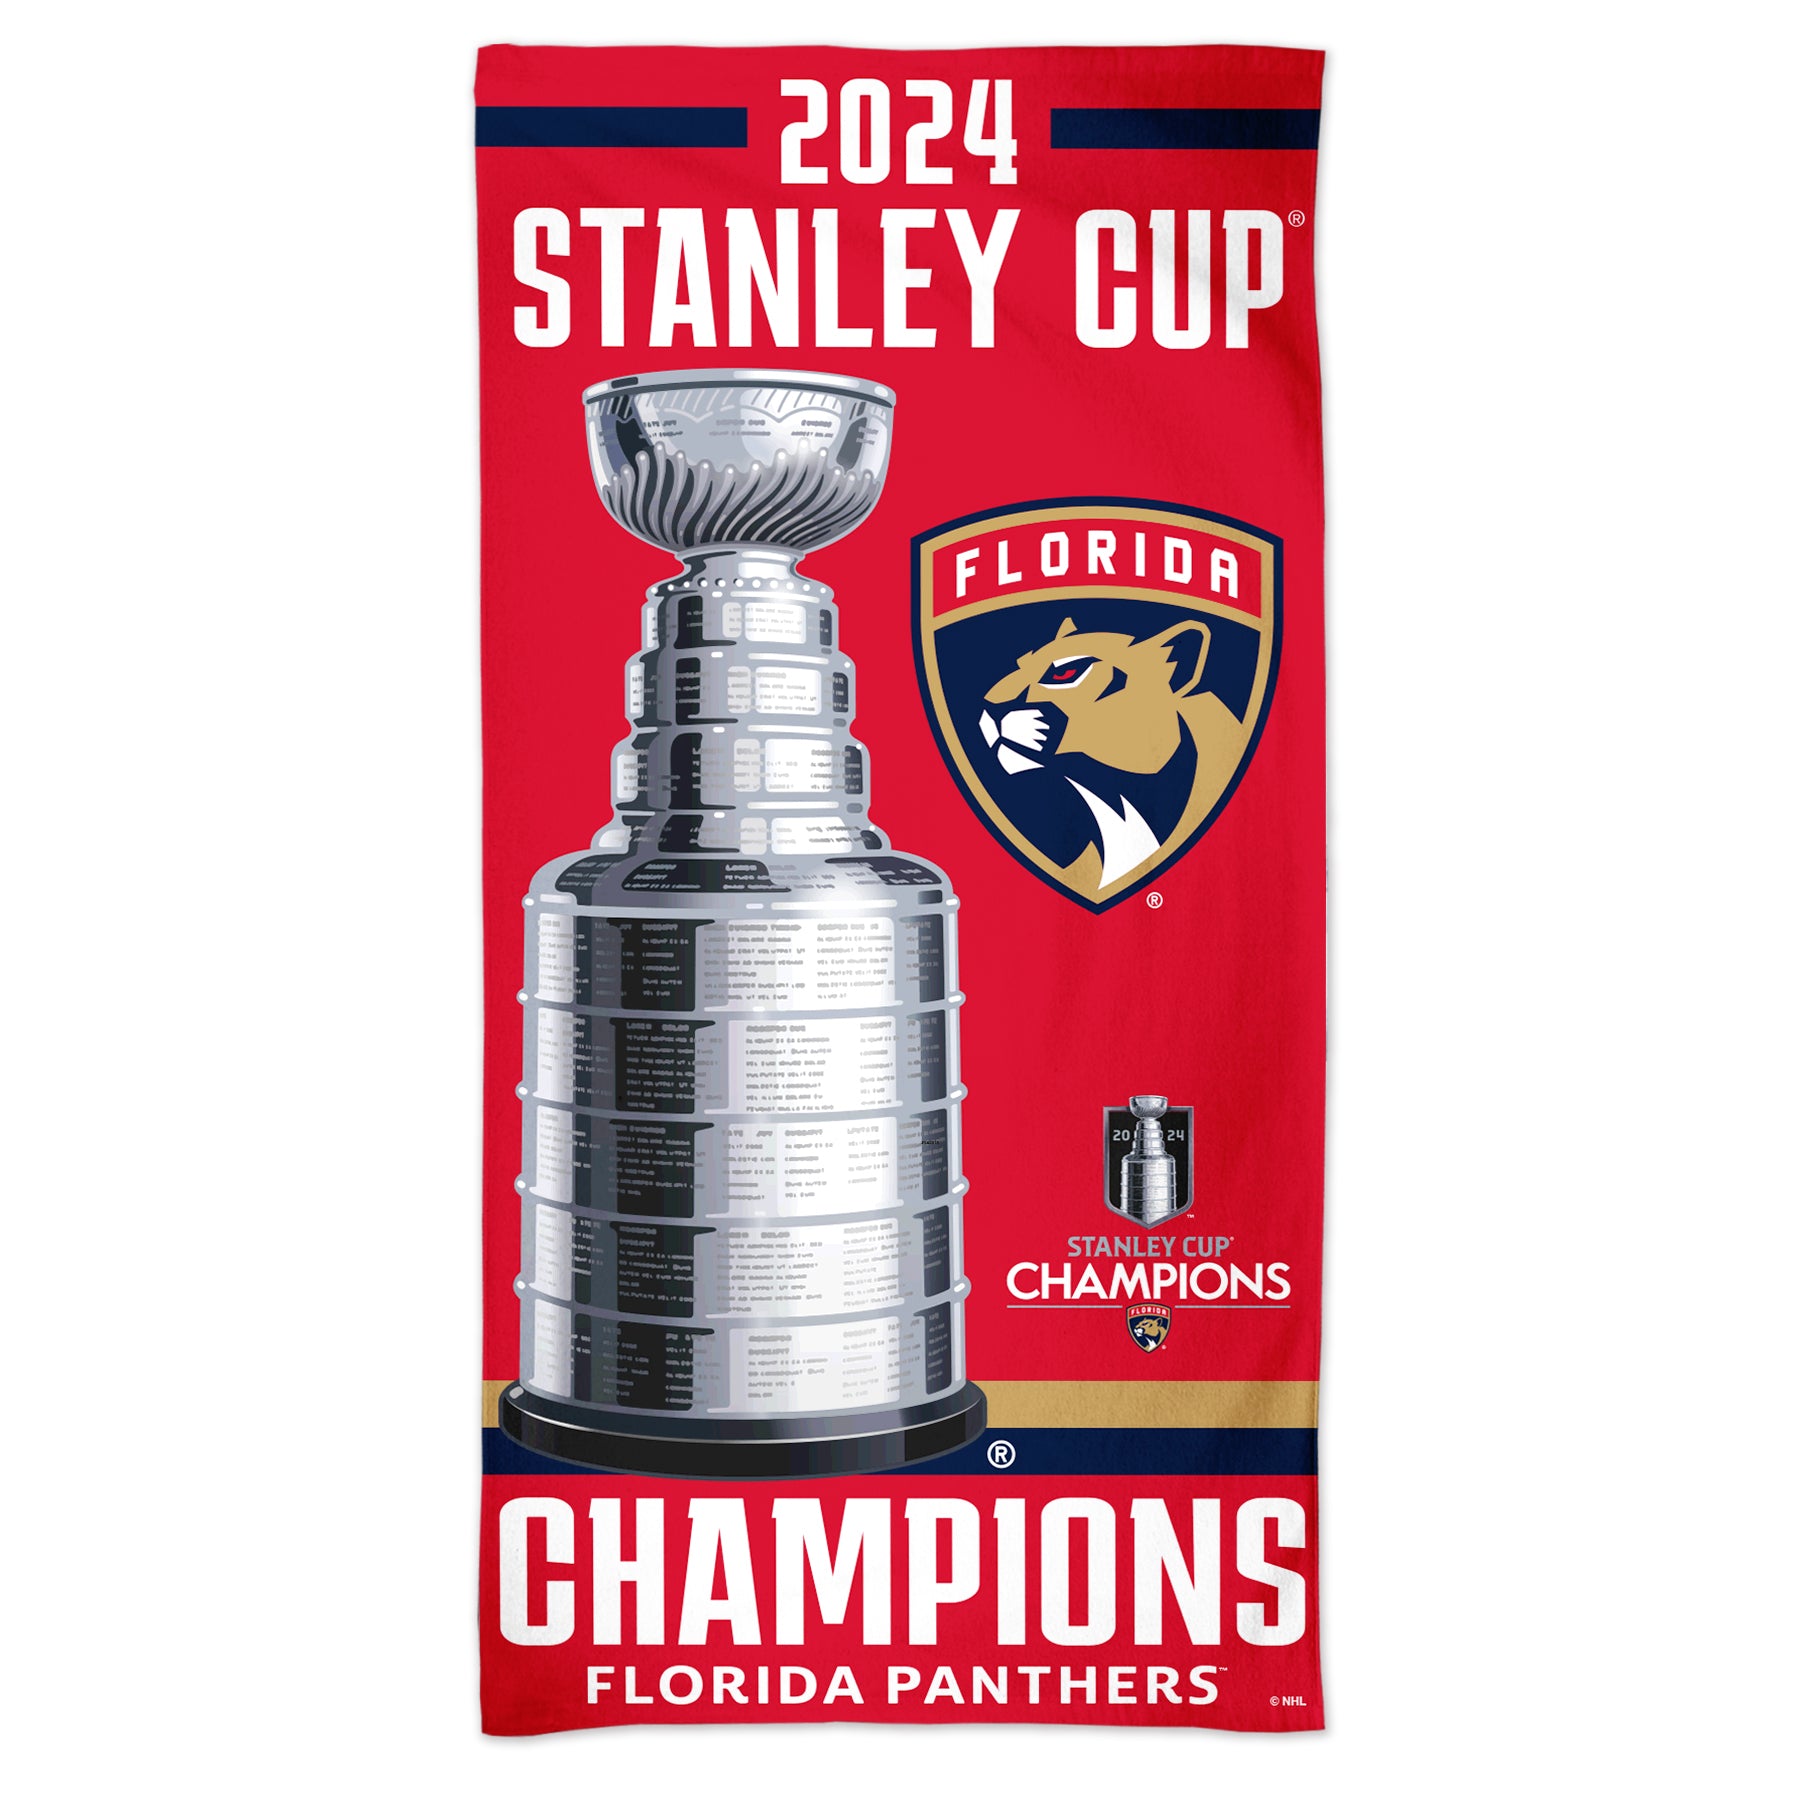 Florida Panthers 2024 Stanley Cup Champions Spectra Beach Towel - 30 x 60